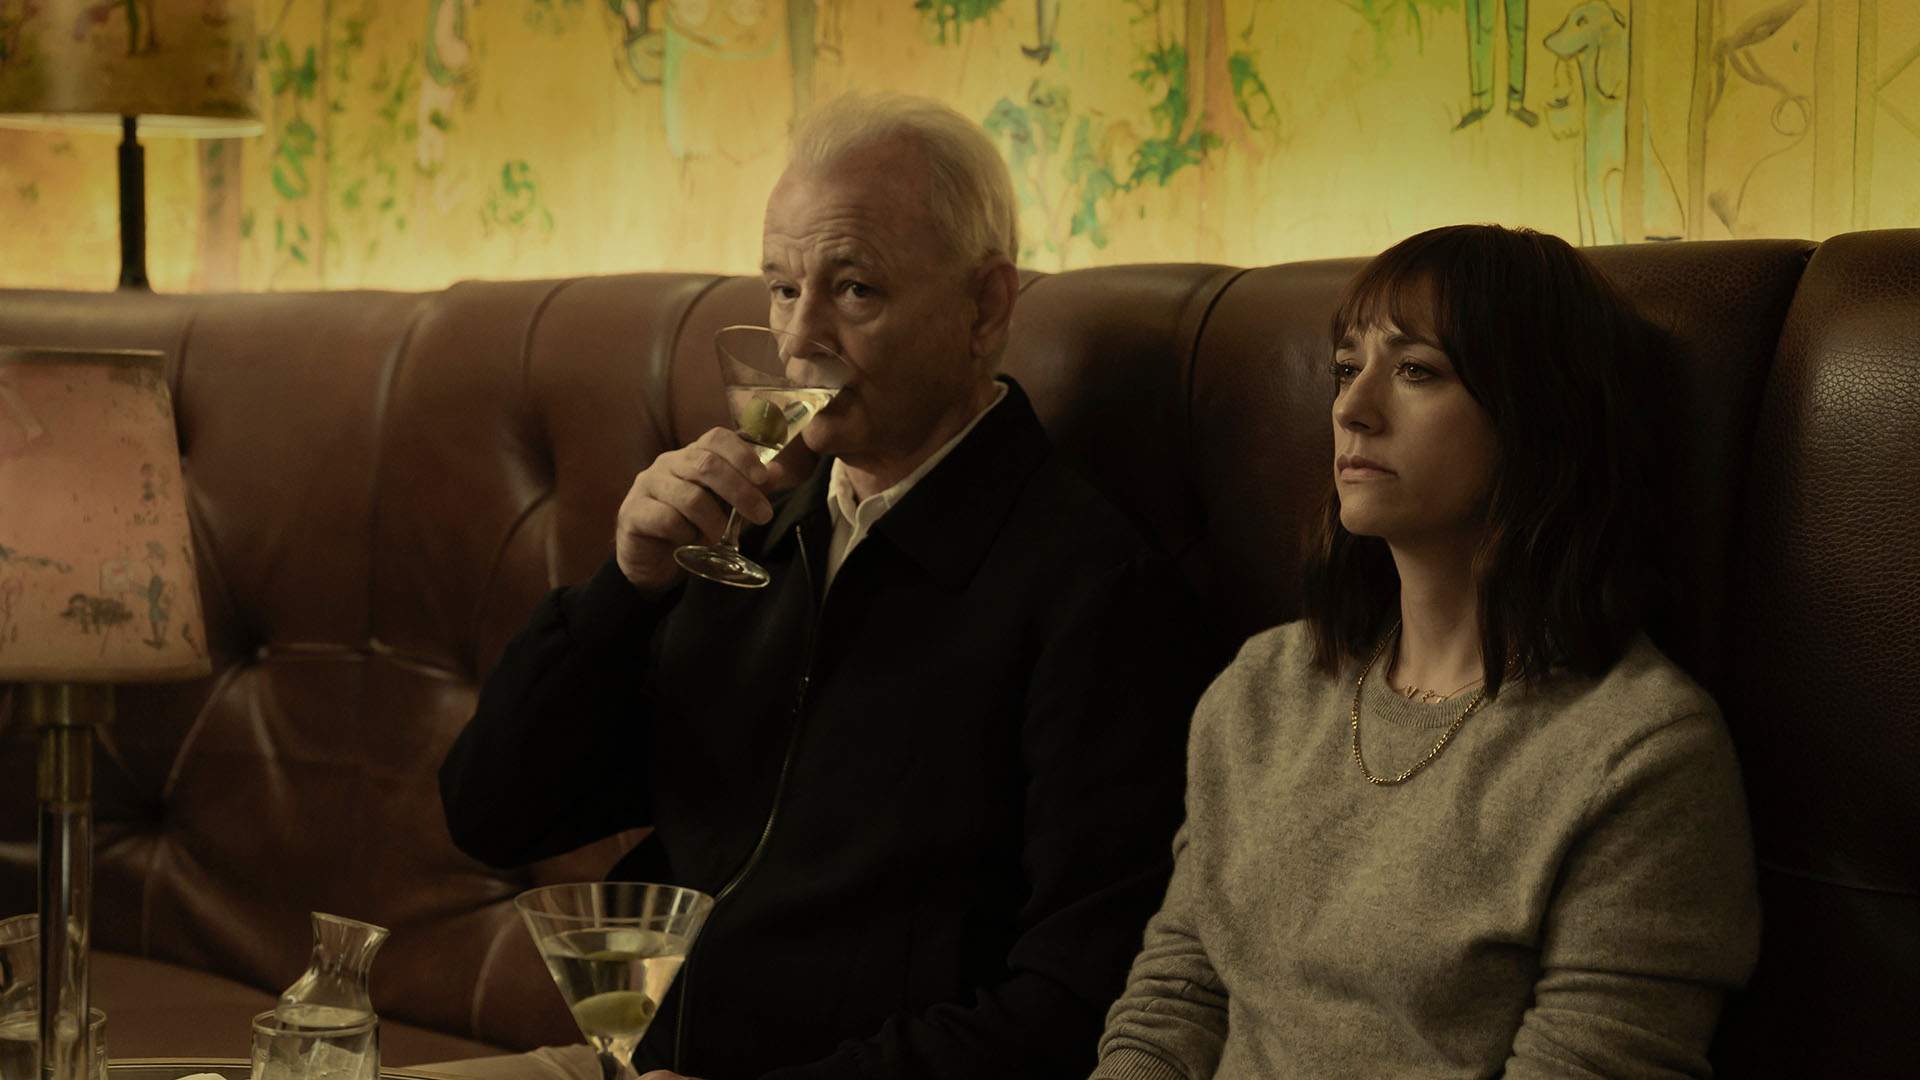 The Trailer for Sofia Coppola's Bill Murray-Starring Father-Daughter Comedy 'On the Rocks' Is Here